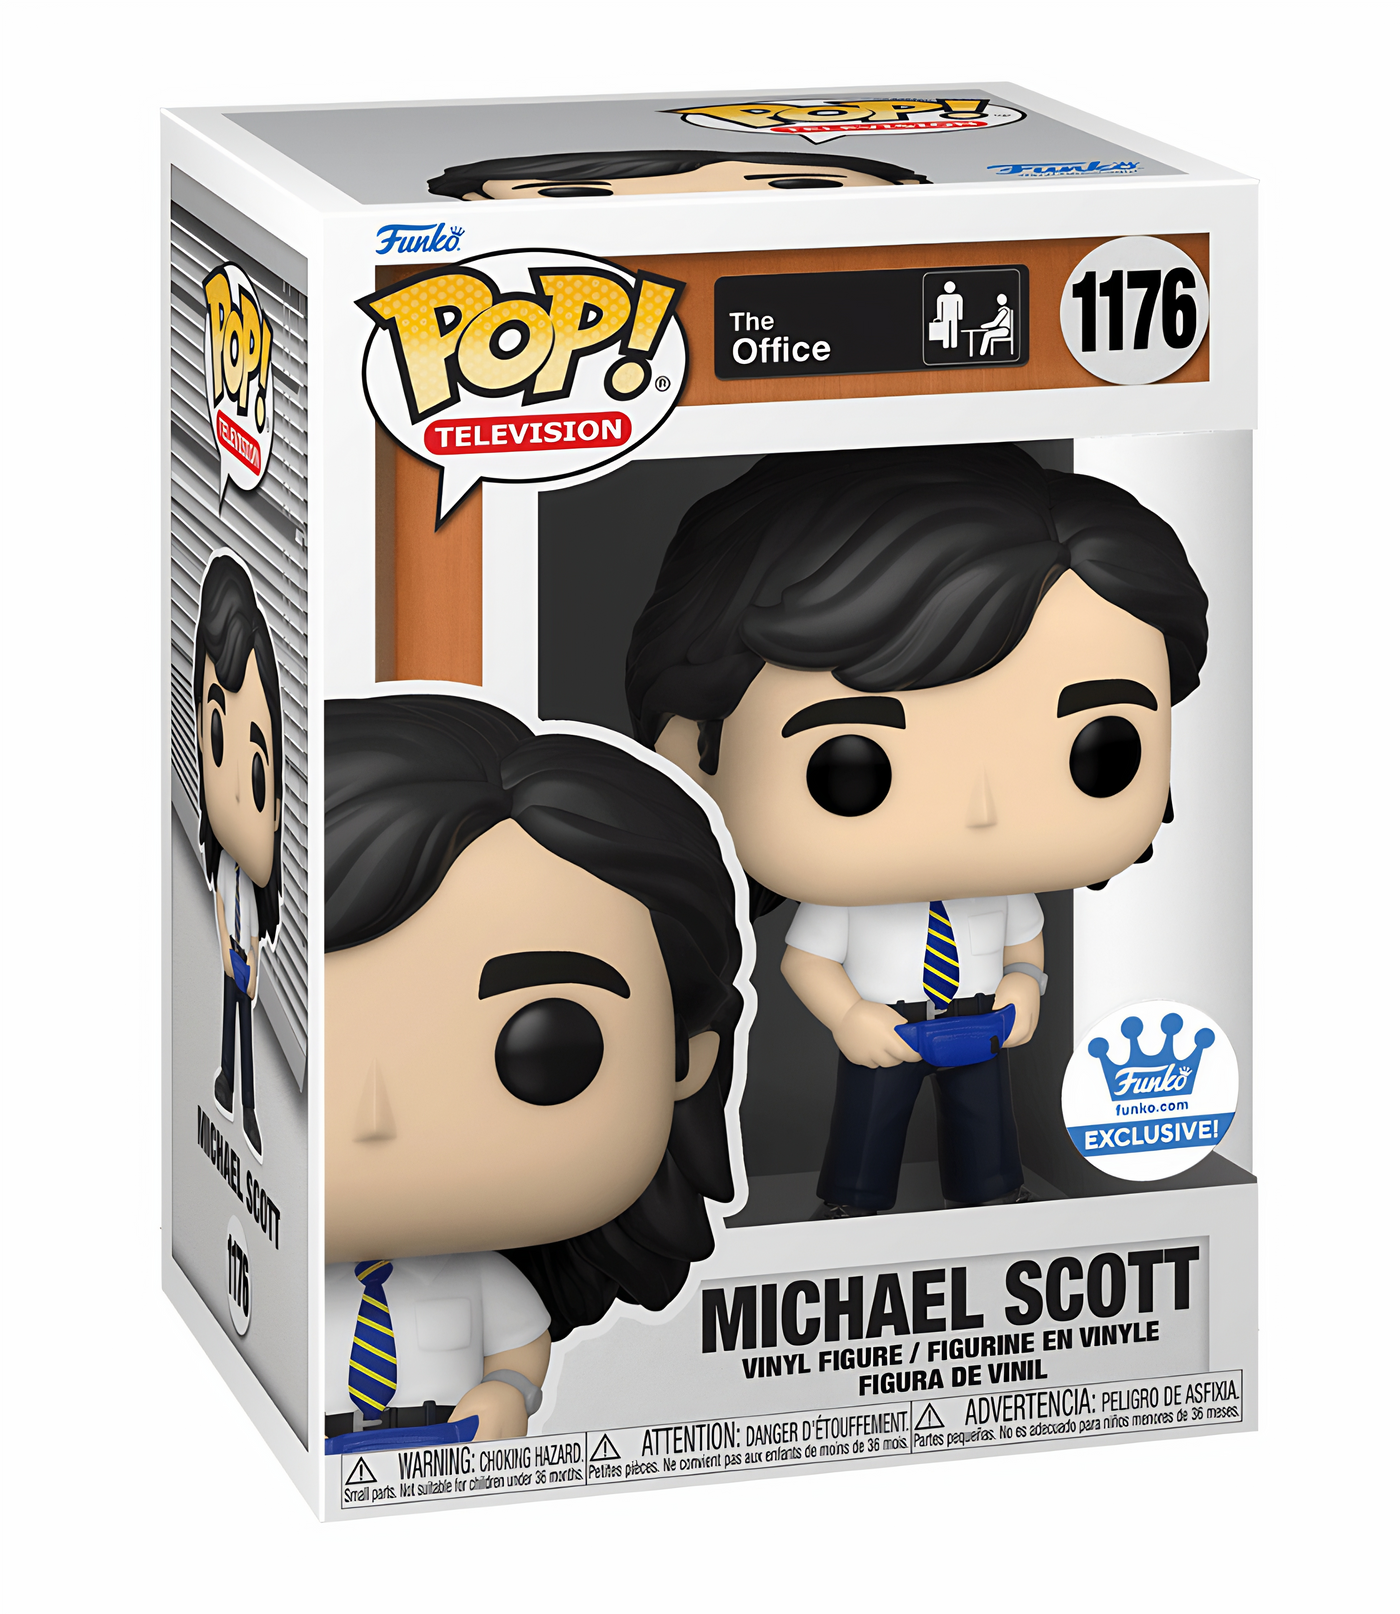 POP! Television: 1176 The Office, Michael Scott Exclusive